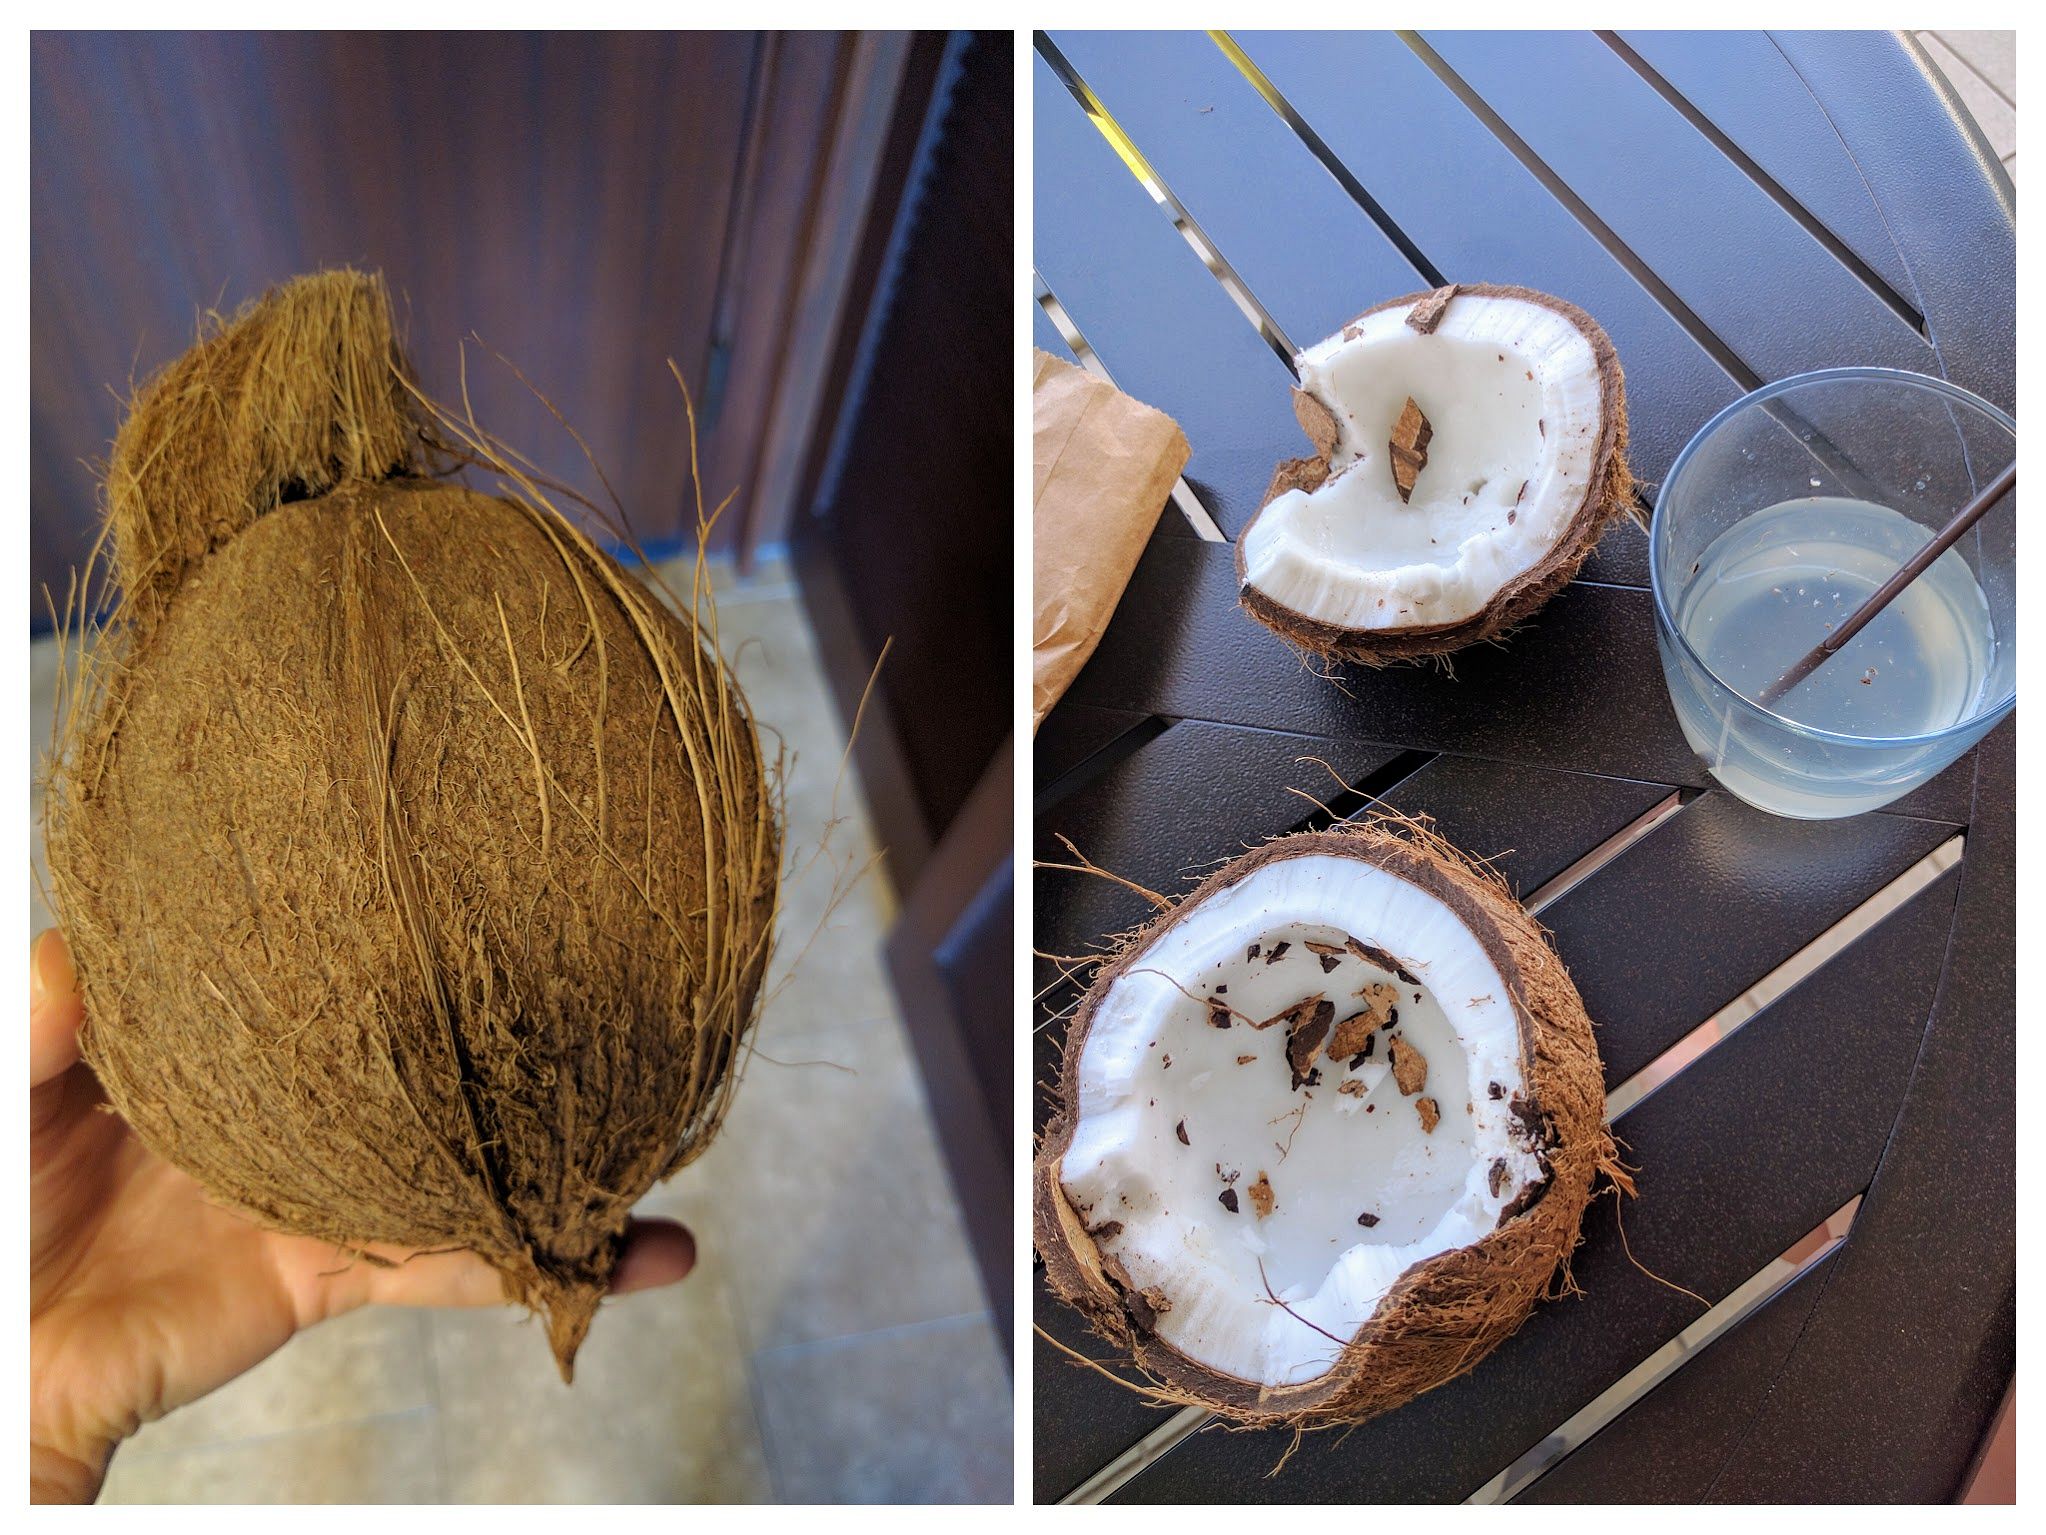 A collage of a whole coconut and an opened coconut.